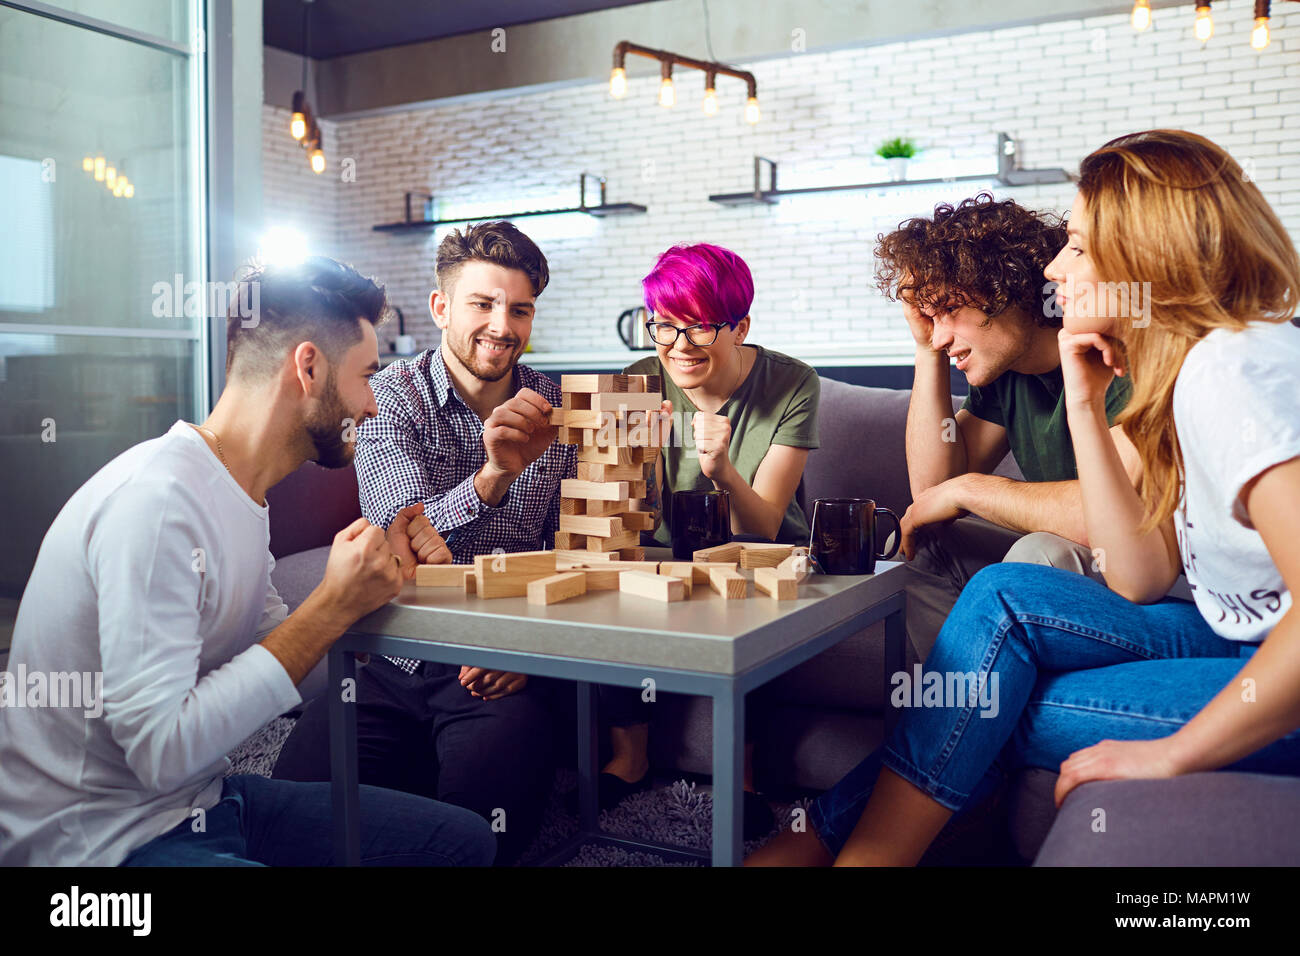 A group of friends play board games in the room. Stock Photo